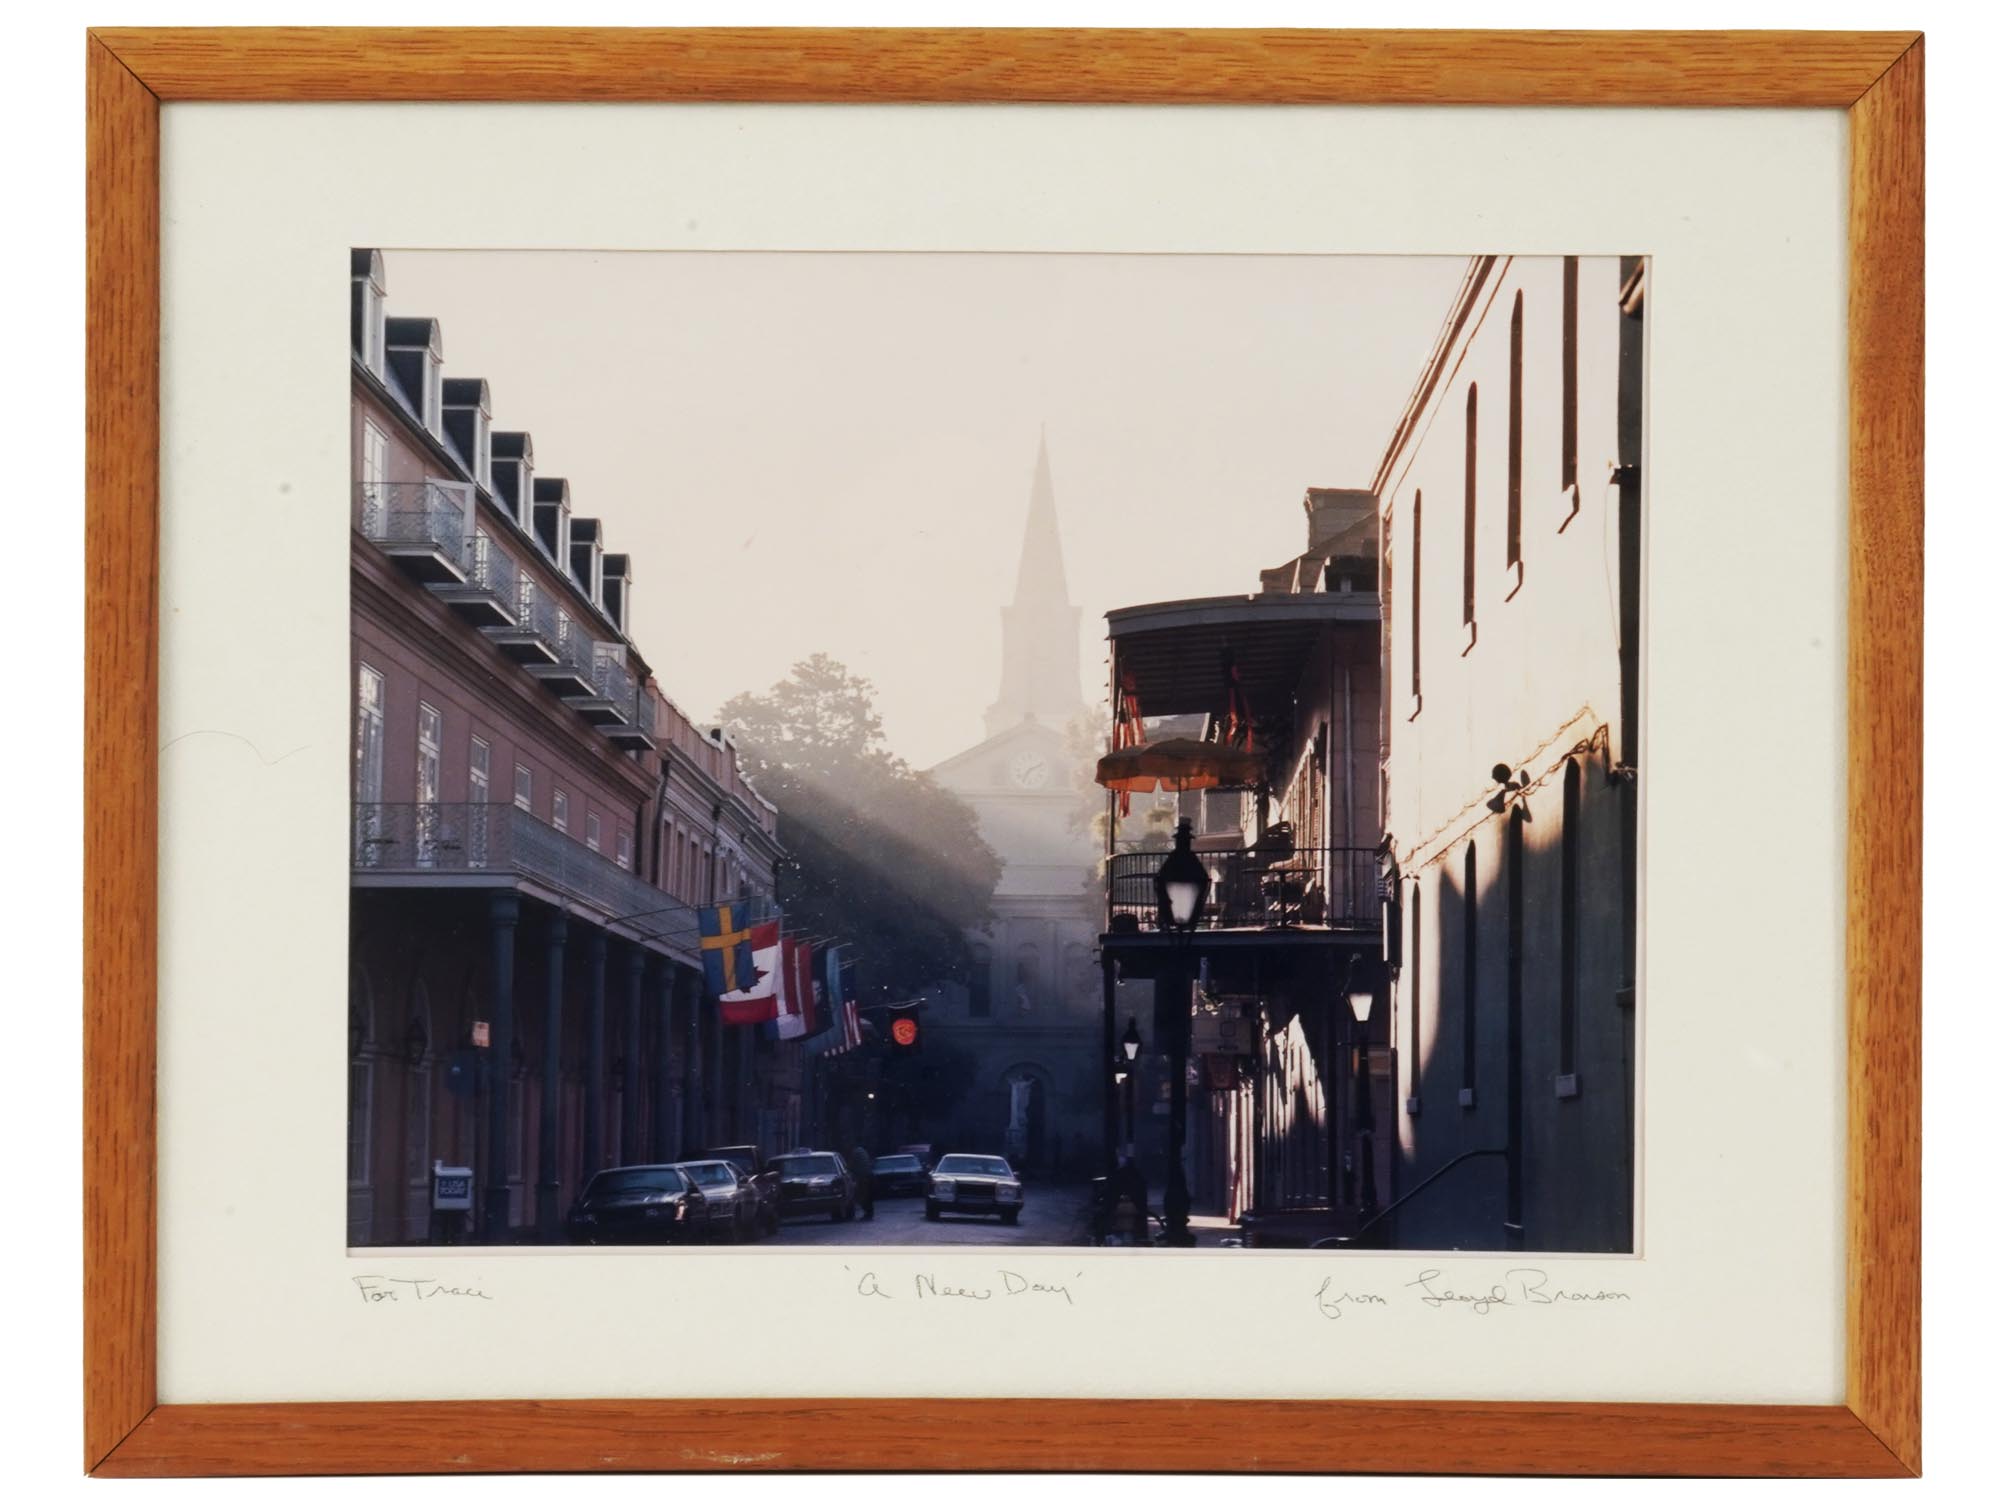 FRAMED PHOTOGRAPH STREET VIEW BY LLOYD BRONSON PIC-0